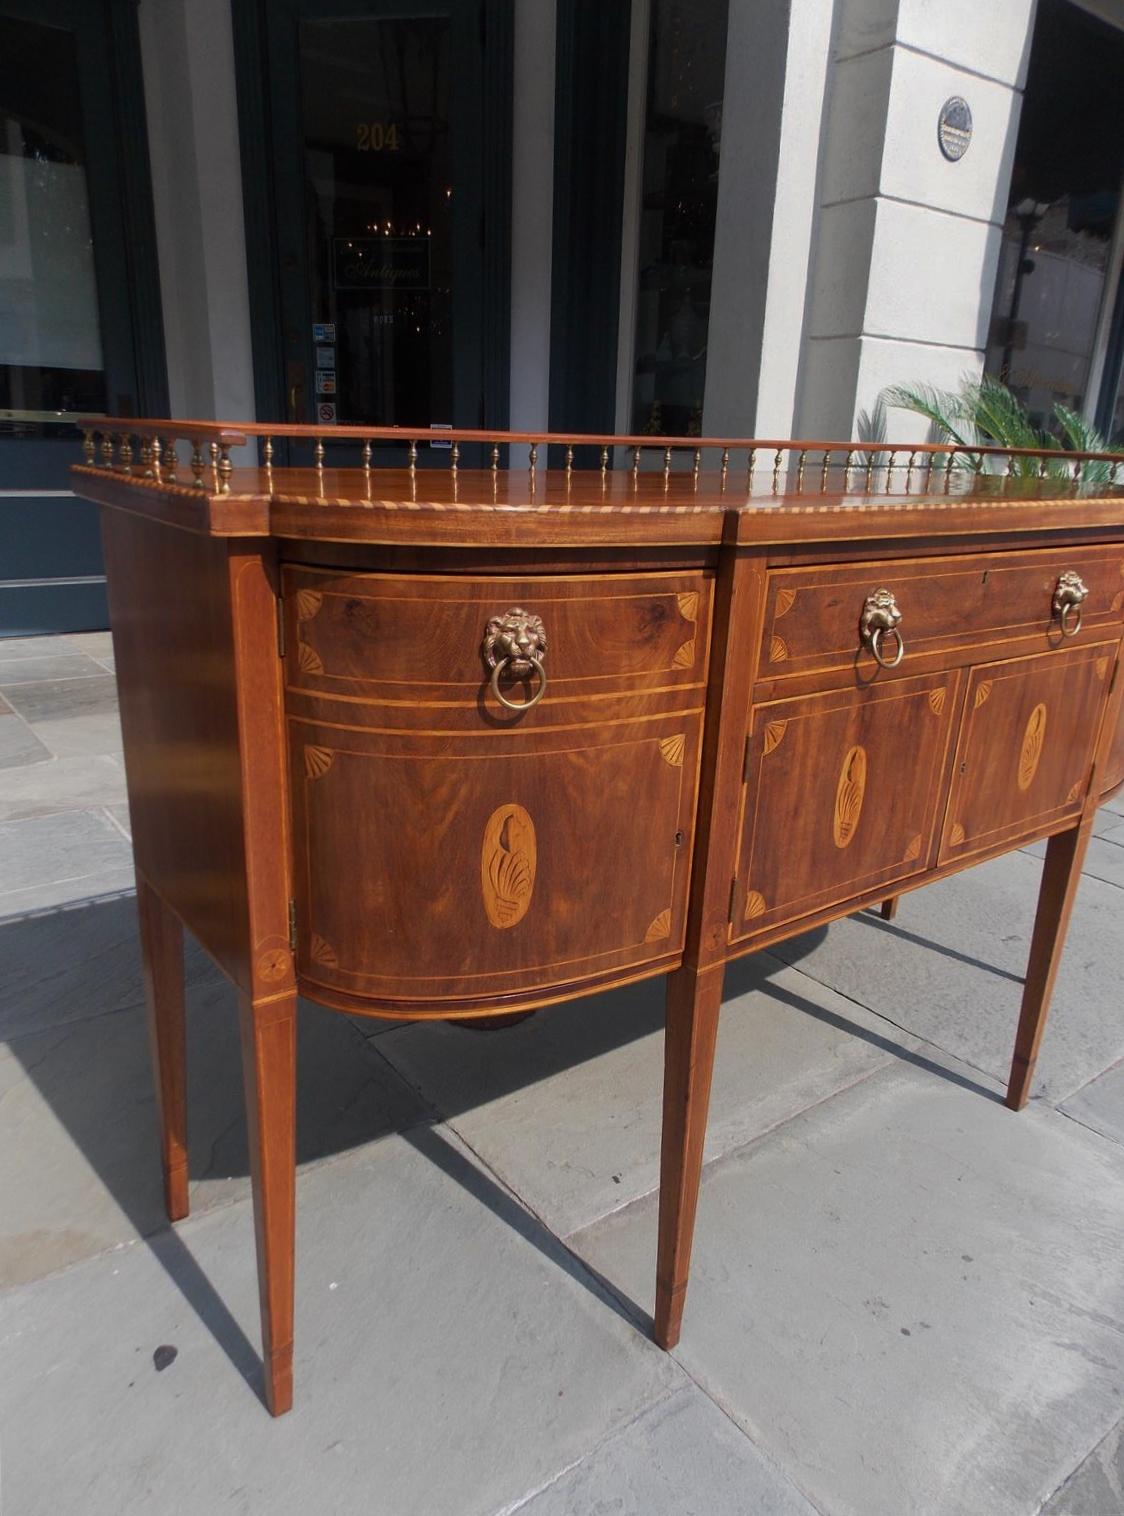 Hepplewhite American Mahogany Gallery Sideboard with Conch Shell and Patera Inlays. C. 1840 For Sale